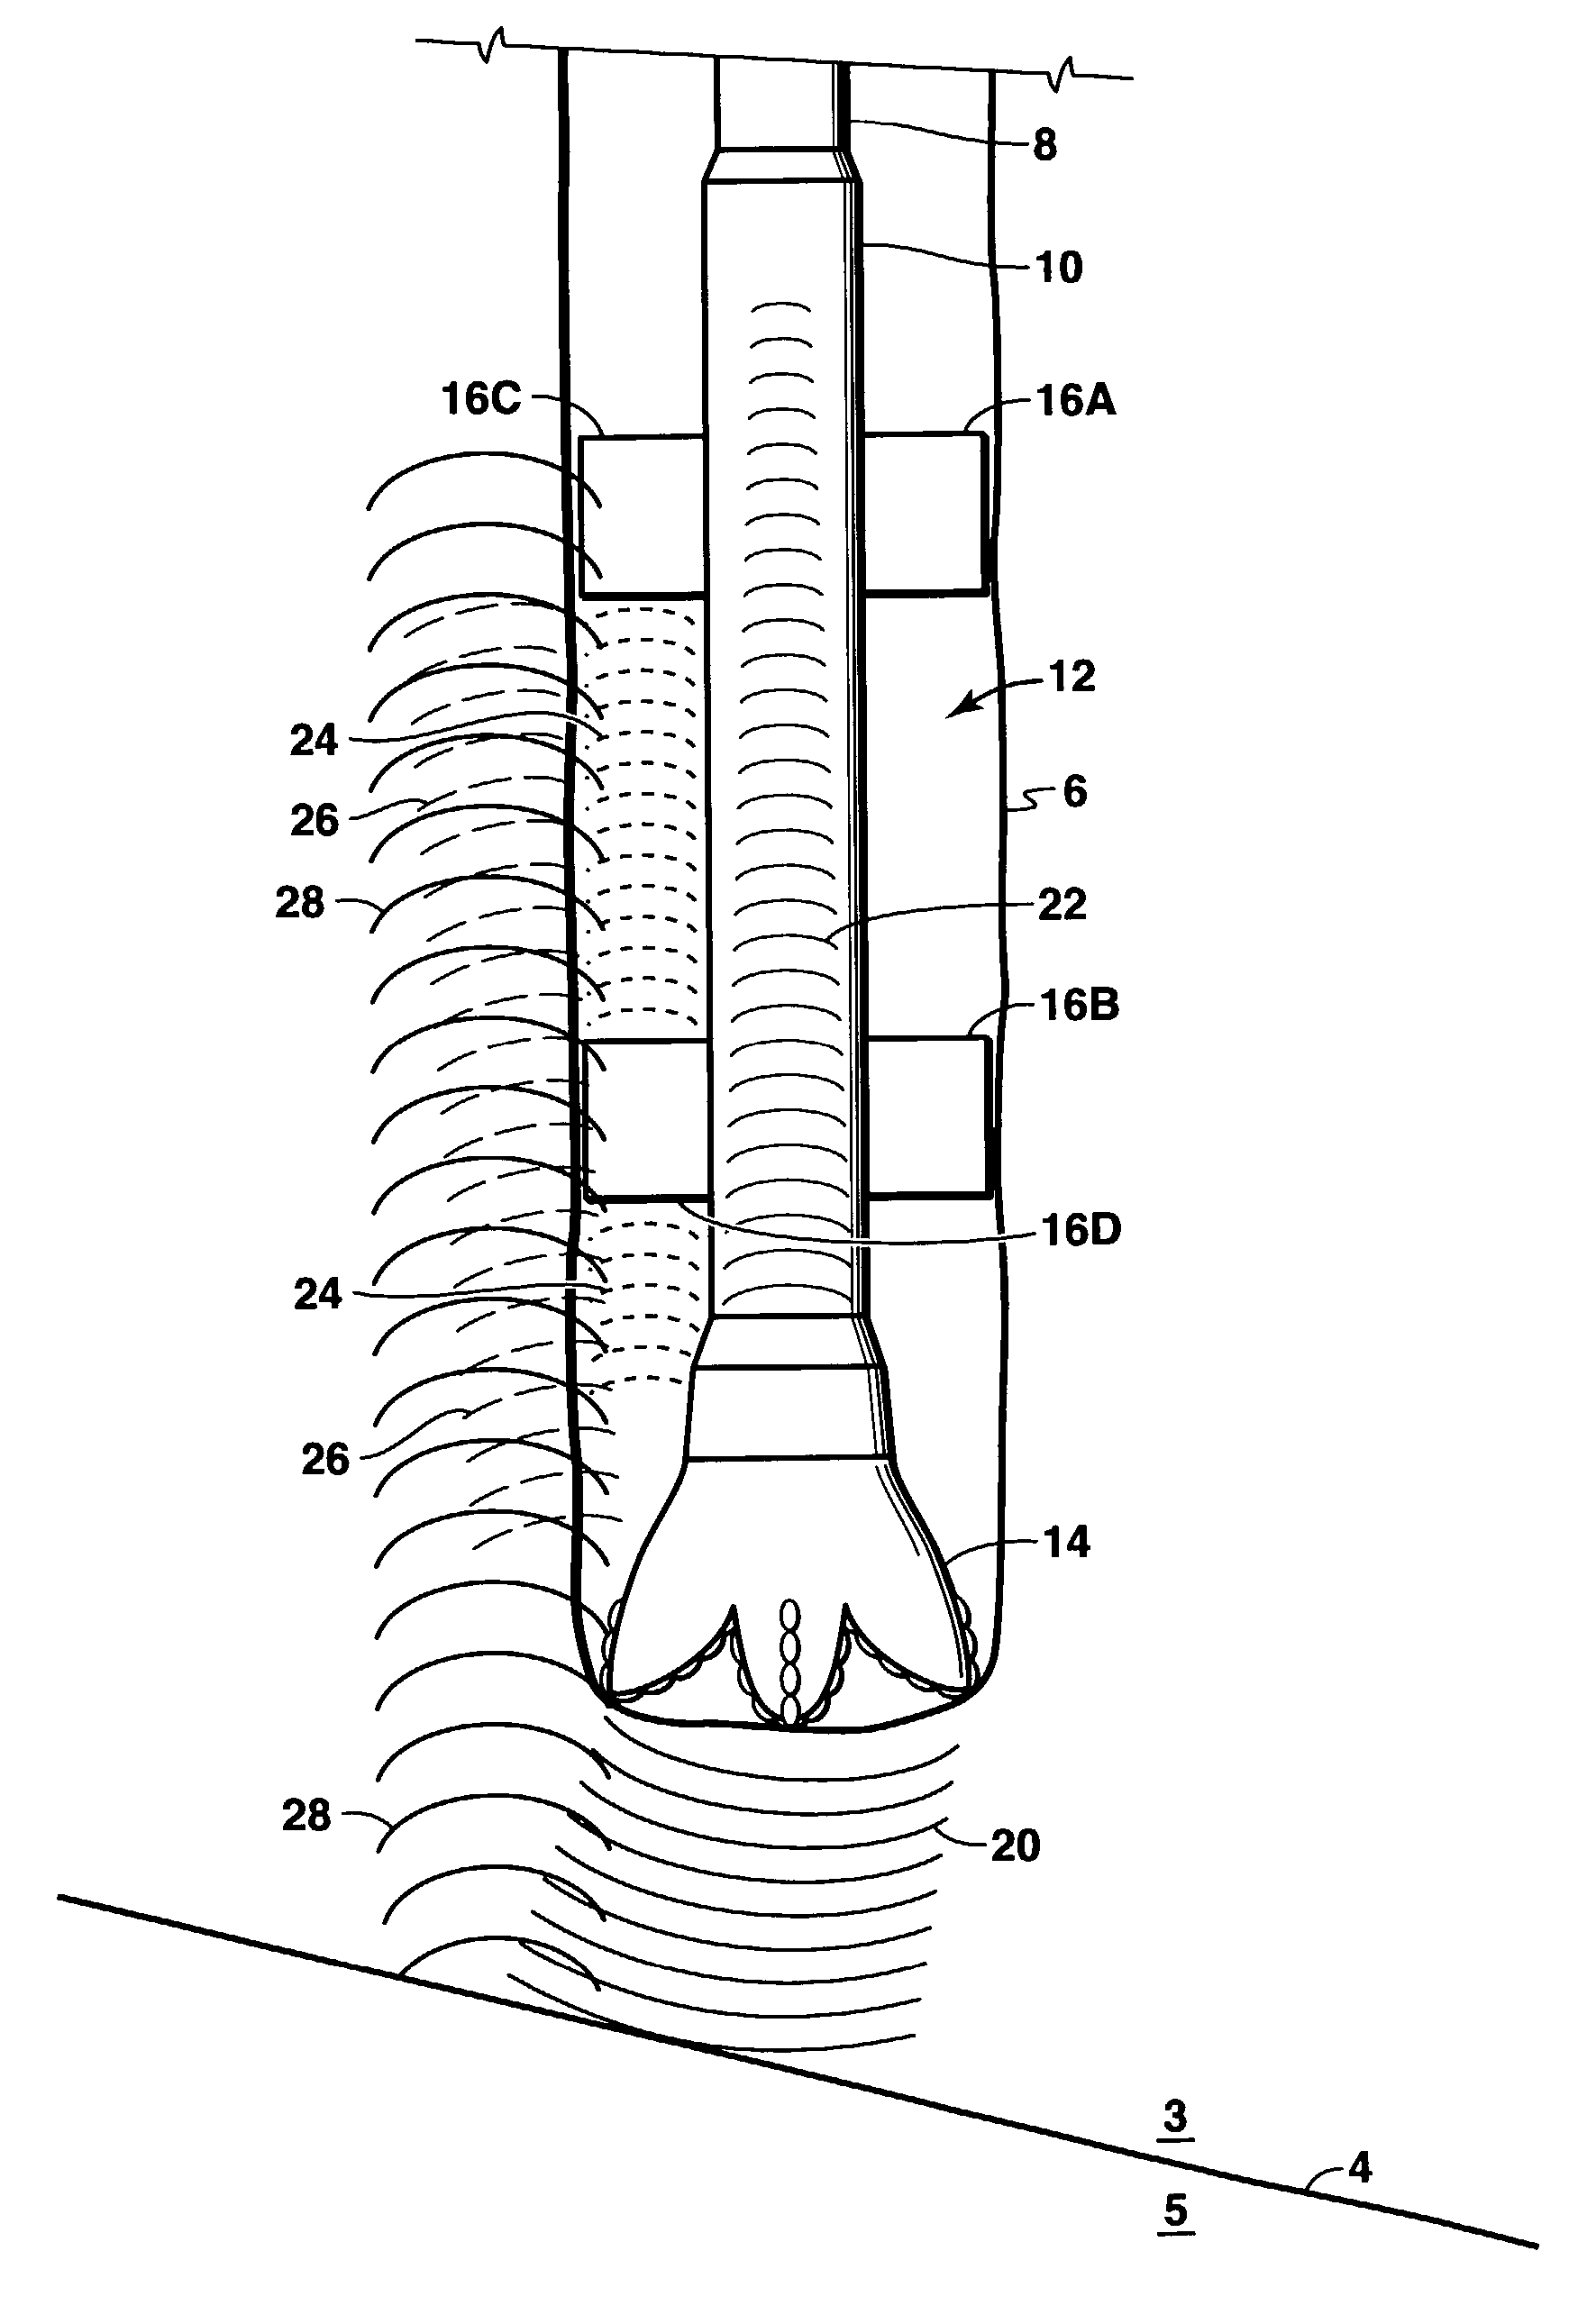 Method for borehole measurement of formation properties